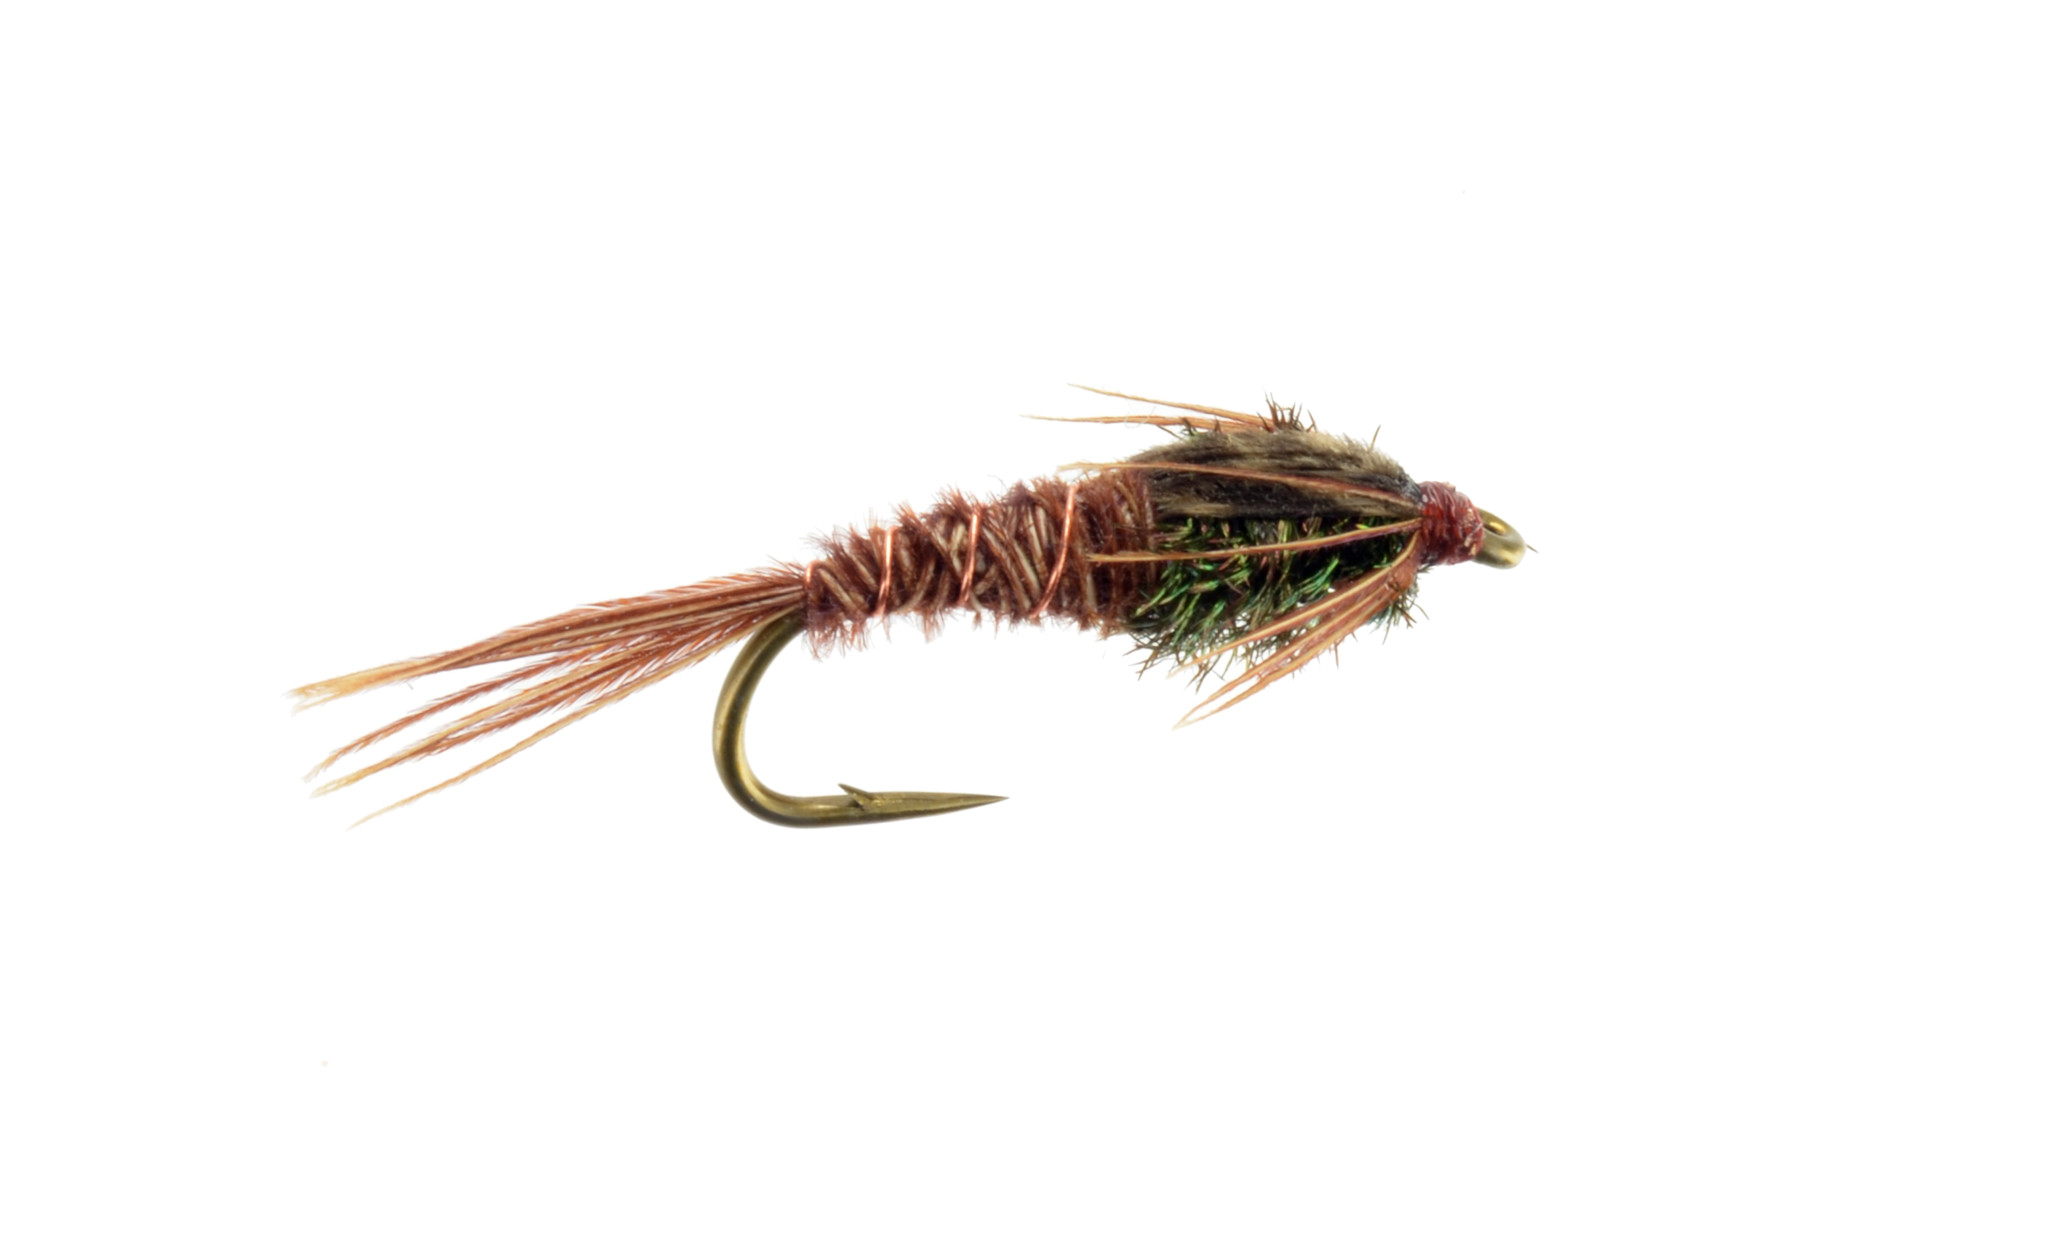 18 Nymphs Trout Fly Fishing Flies GRHE Pheasant Tail & Black P Tail-Dragonflies